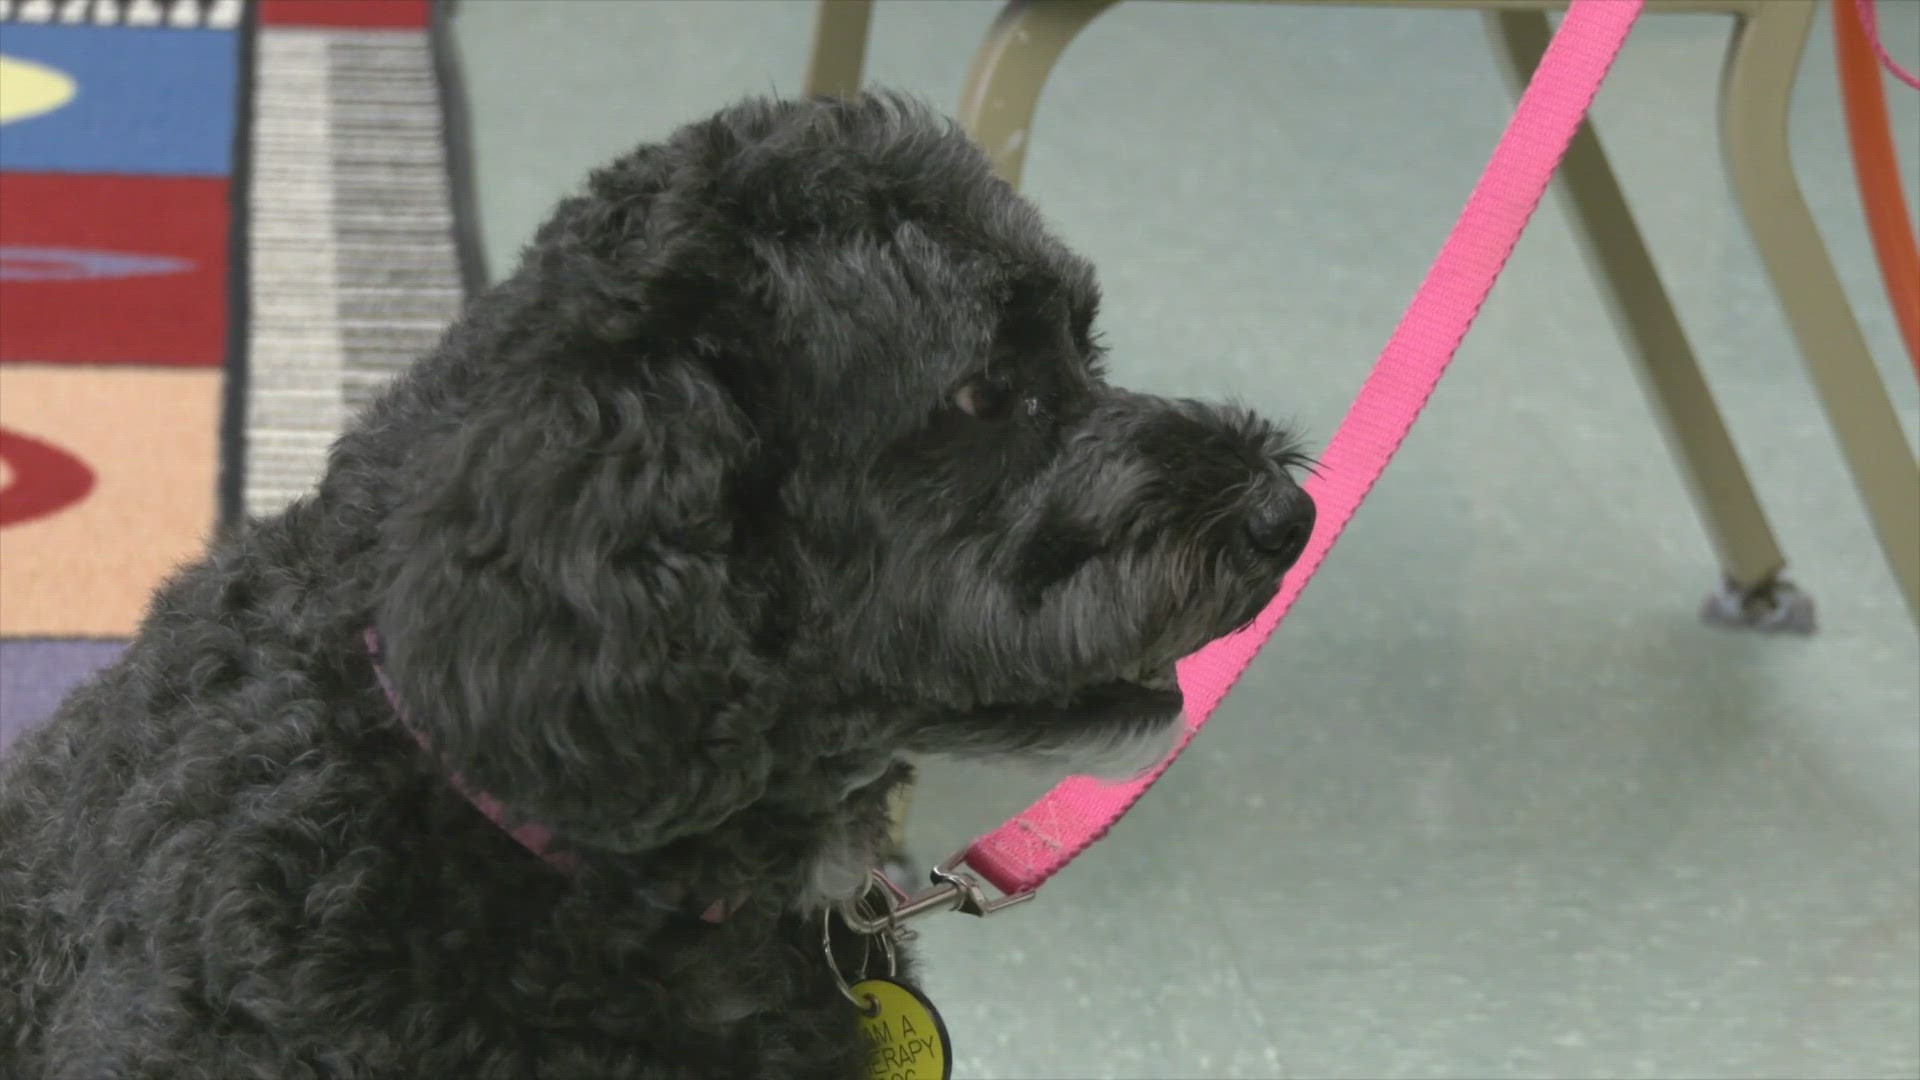 The schnauzer poodle mix is leaving quite the pawprint on students from kindergarten all the way through college.